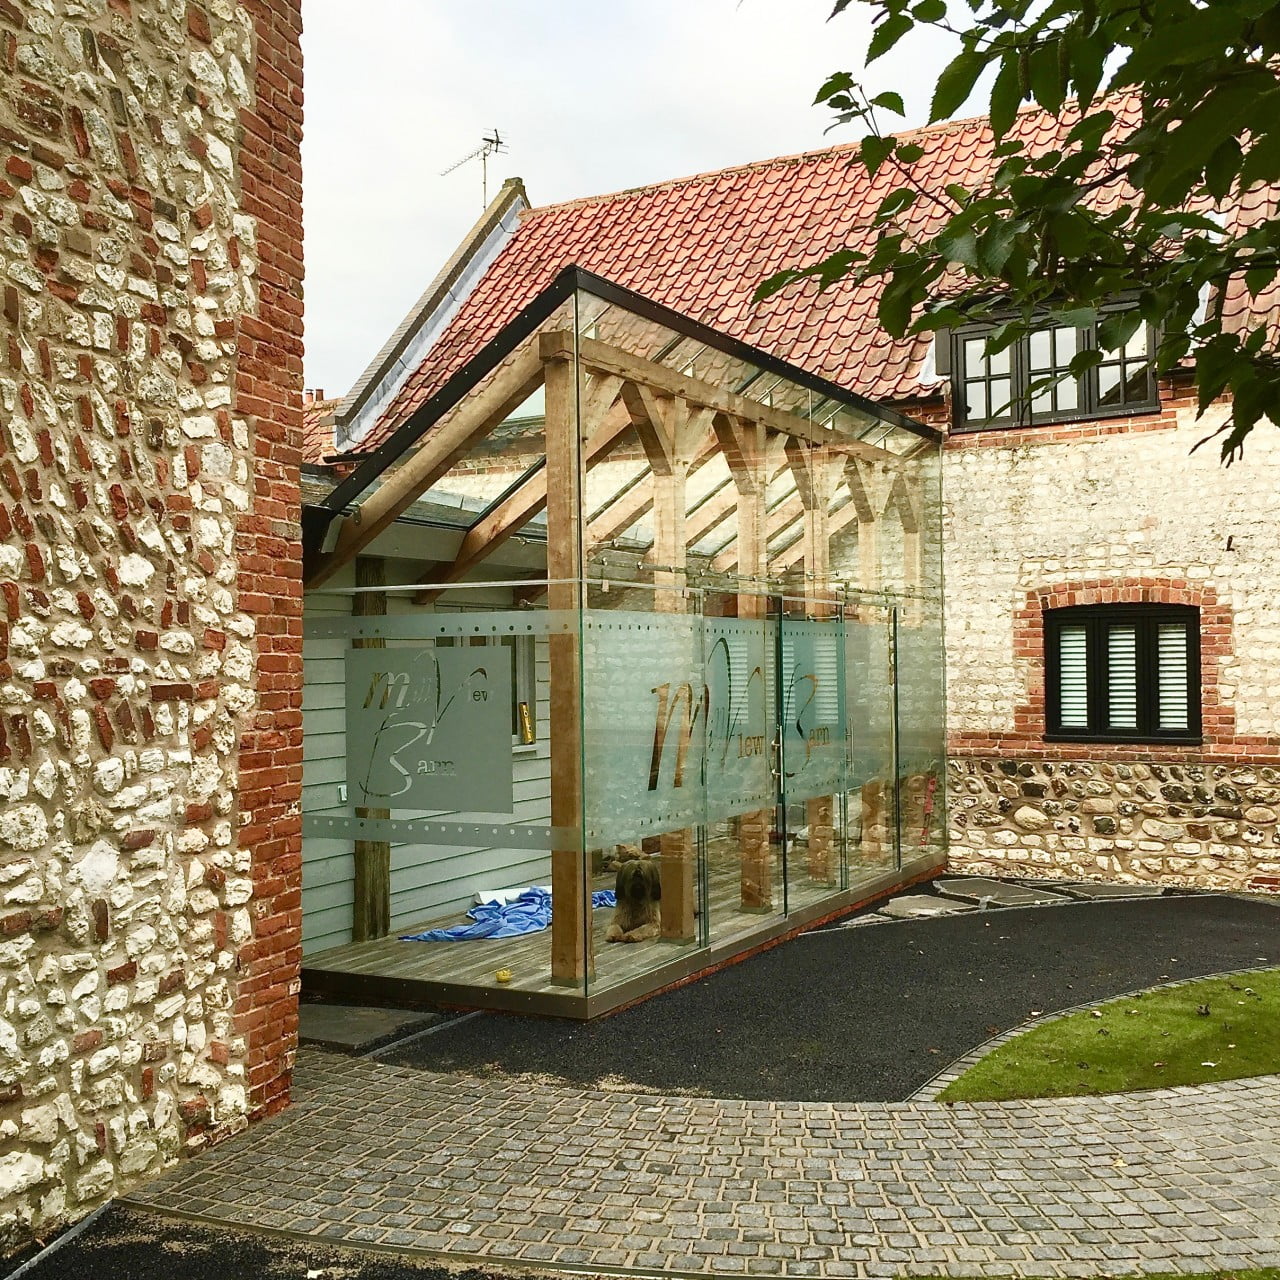 This is a glass box & oak framed extension by Igloo. I designed the text & installed t for my client